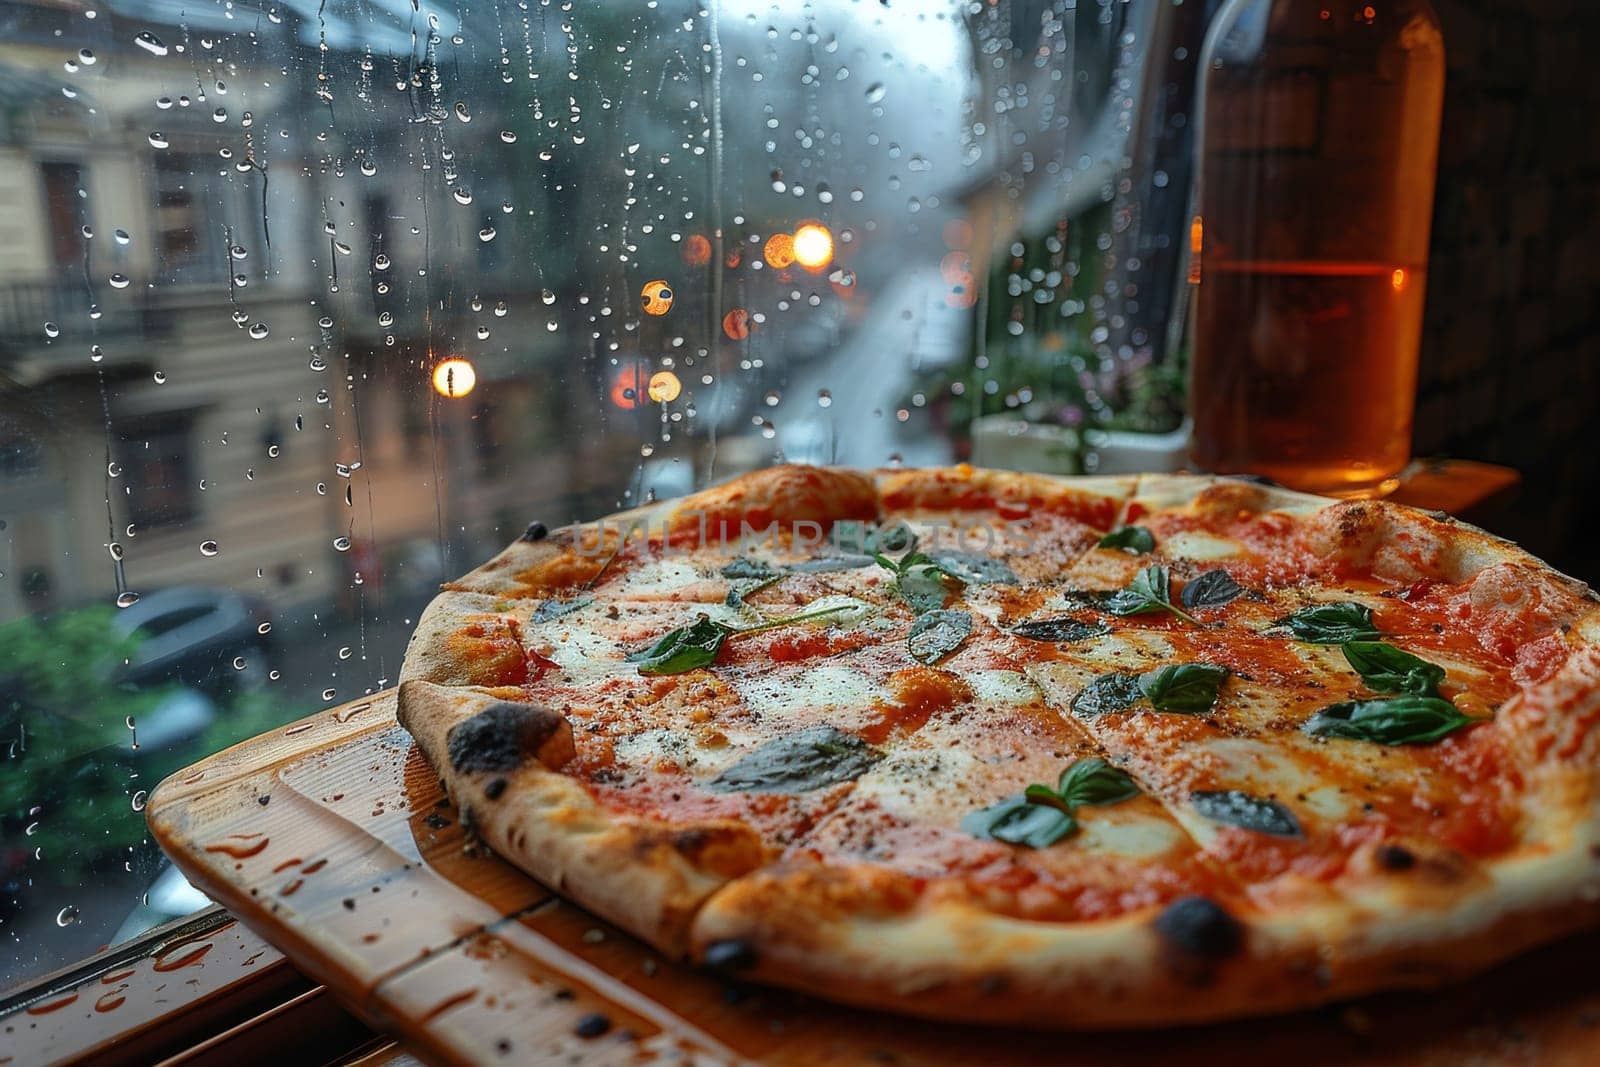 A pizza with basil and cheese sits on a wooden board in front of a window. The rain outside can be seen through the window, creating a cozy atmosphere